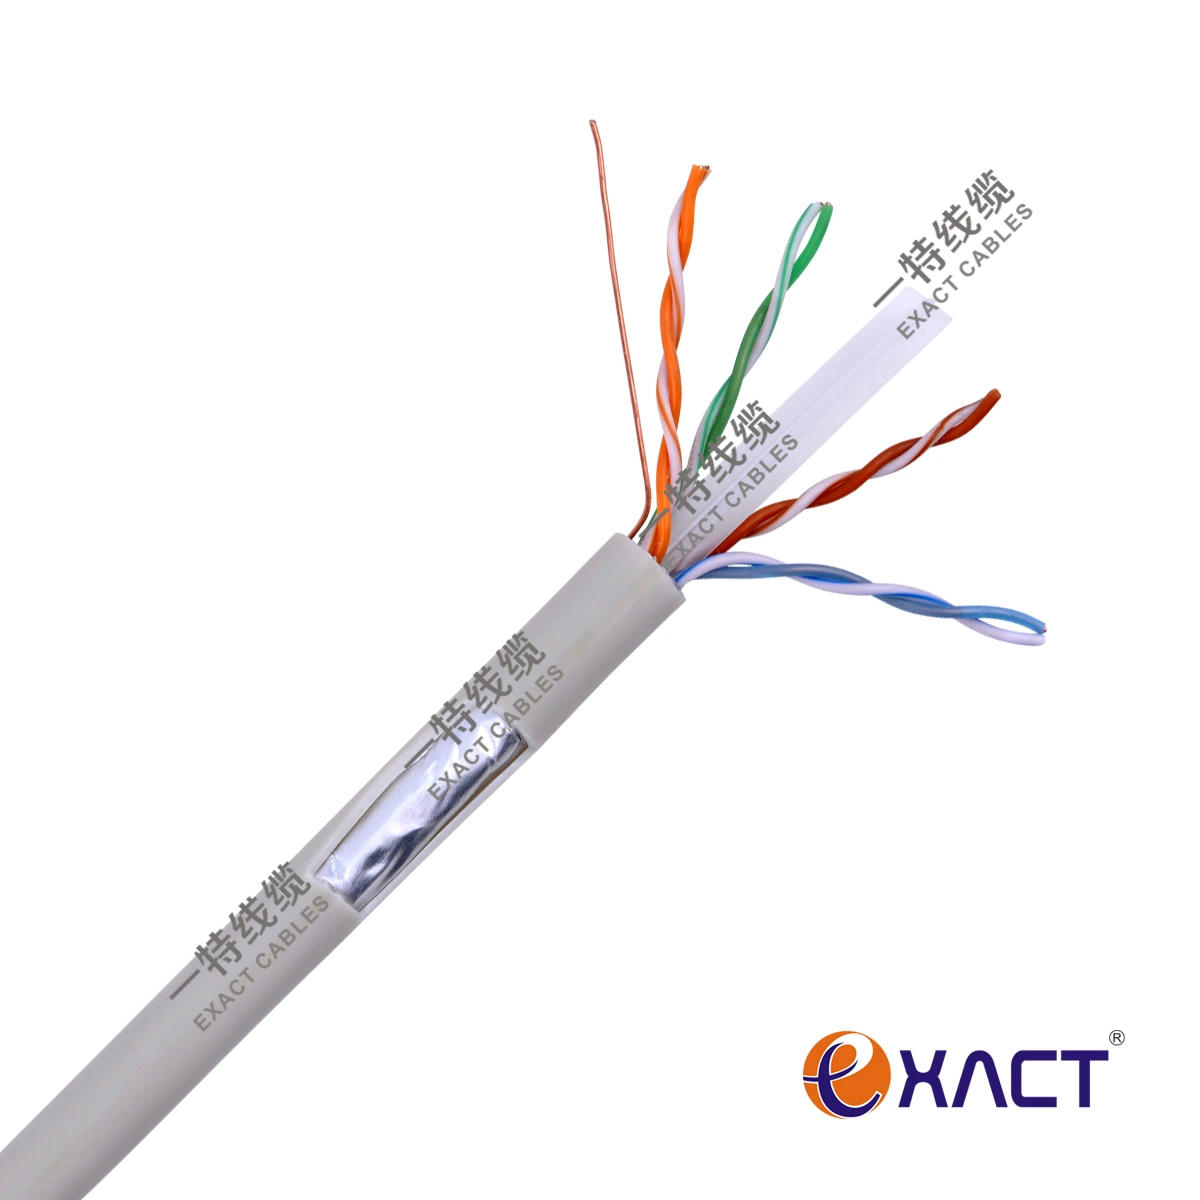 Network CAT6 4-Pair FTP 23AWG Communication Cable PVC Jacket LAN Cable